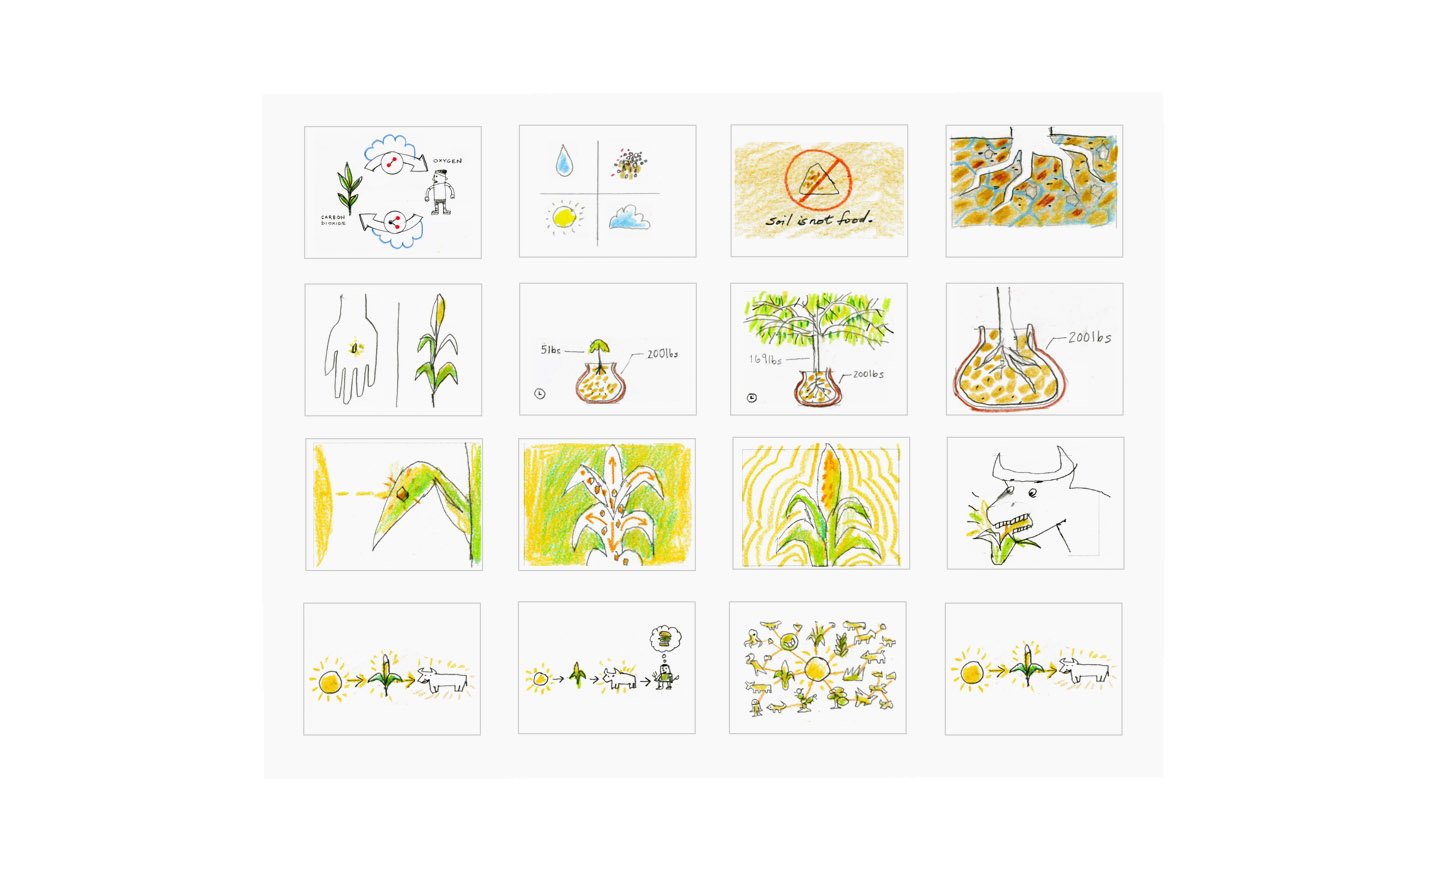 photosynthesis_sketches3.jpg